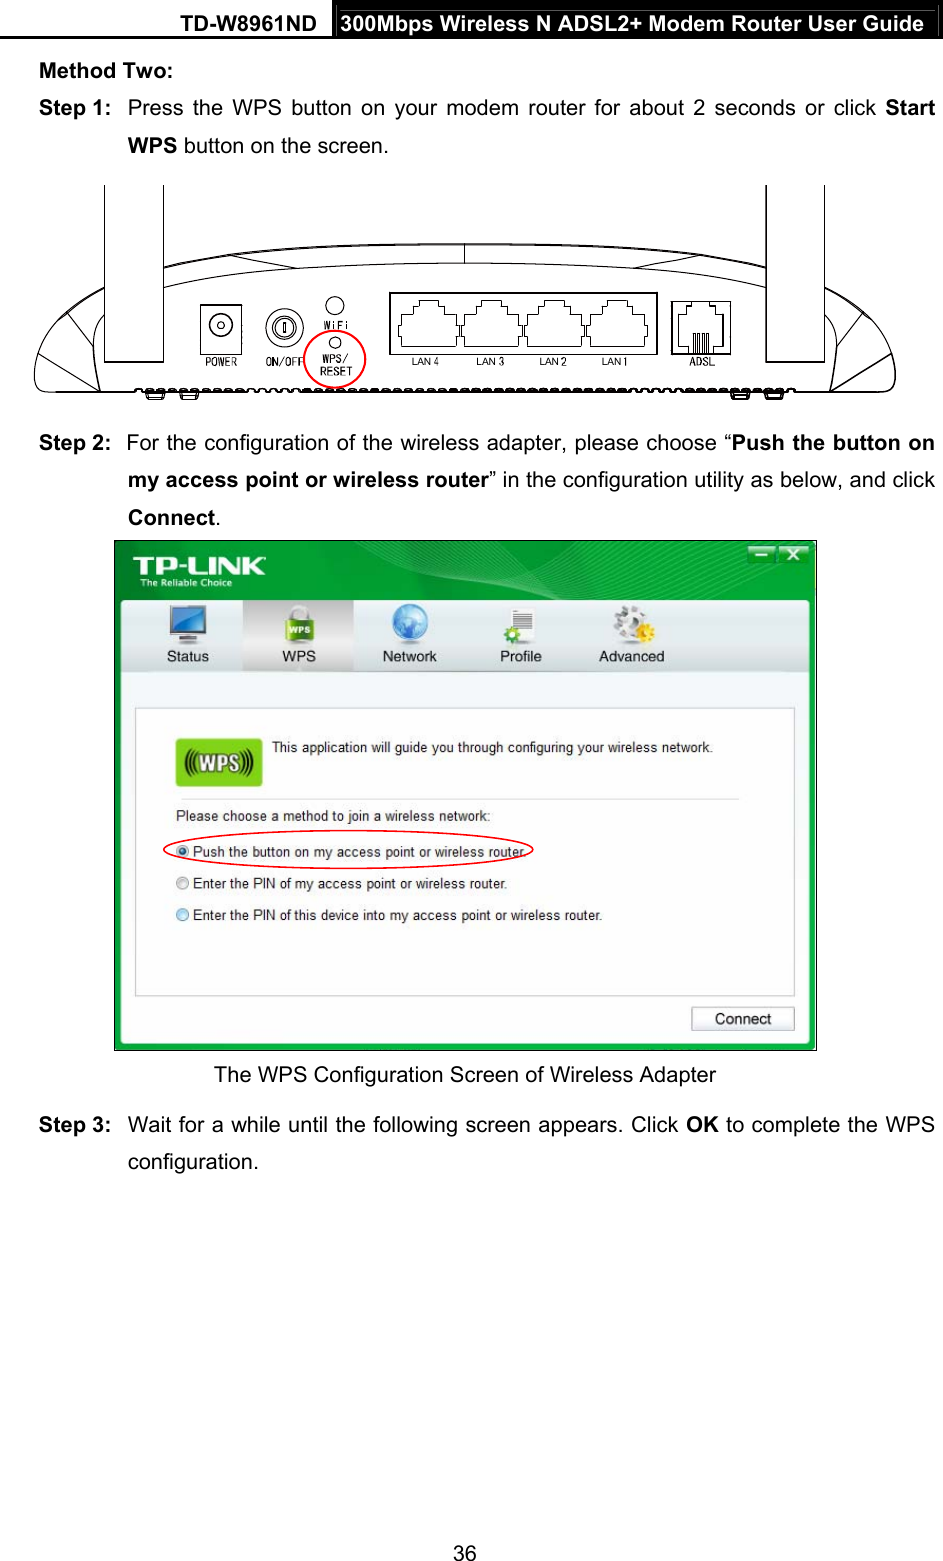 TD-W8961ND  300Mbps Wireless N ADSL2+ Modem Router User Guide  36Method Two: Step 1:  Press the WPS button on your modem router for about 2 seconds or click Start WPS button on the screen. LAN LAN LAN LAN Step 2:  For the configuration of the wireless adapter, please choose “Push the button on my access point or wireless router” in the configuration utility as below, and click Connect.   The WPS Configuration Screen of Wireless Adapter Step 3:  Wait for a while until the following screen appears. Click OK to complete the WPS configuration. 